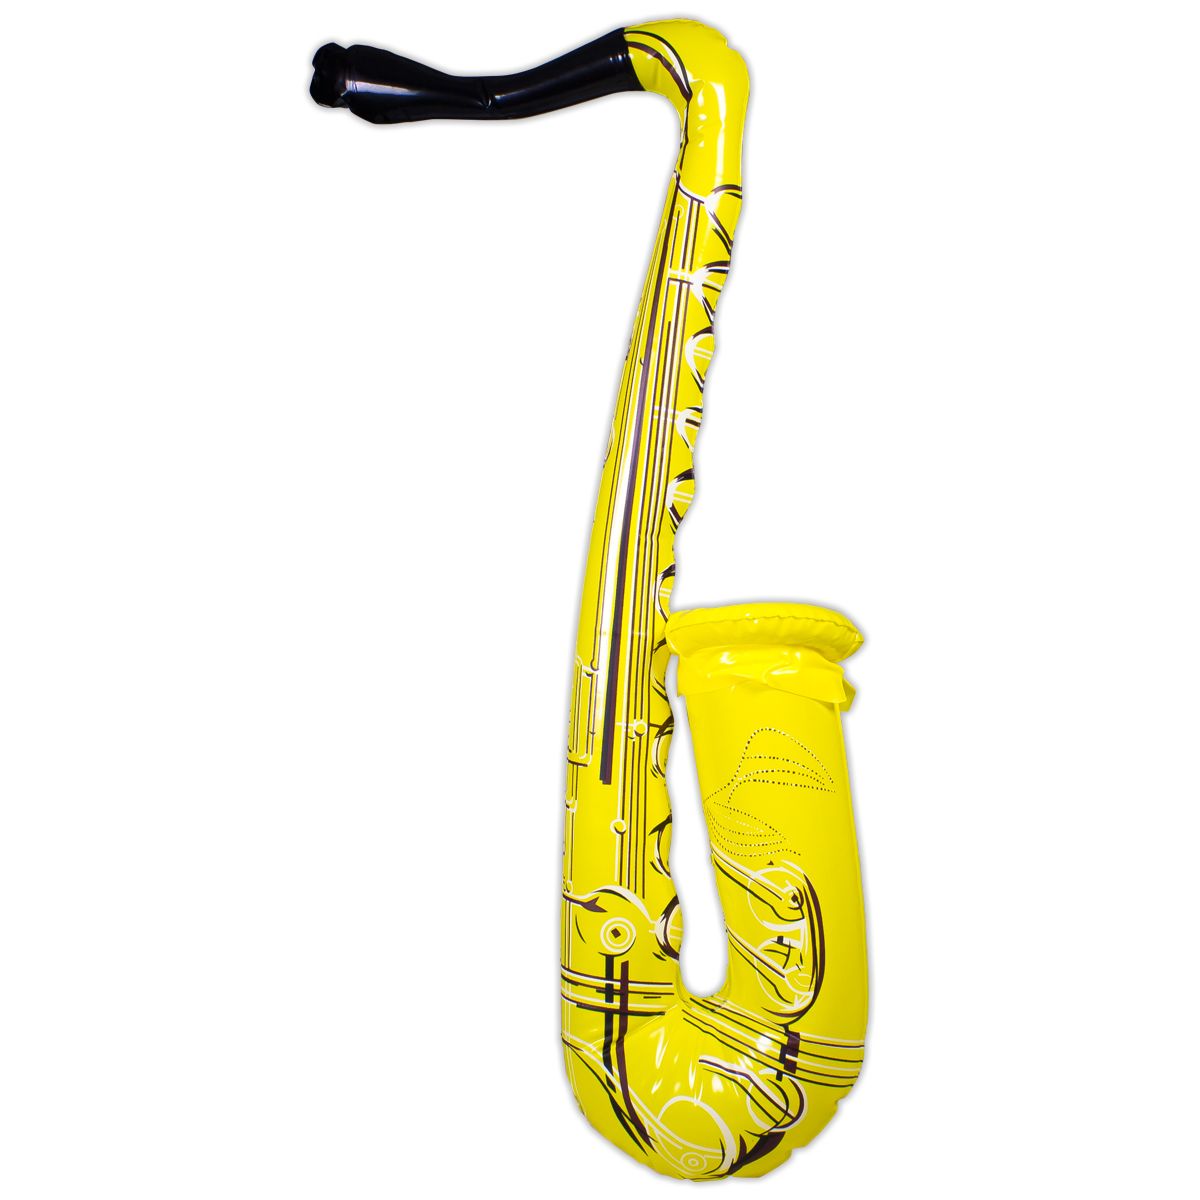 12 INFLATABLE SAXOPHONES 24" Party Favor Jazz Guitar Blow Up #ST61 Free Shipping